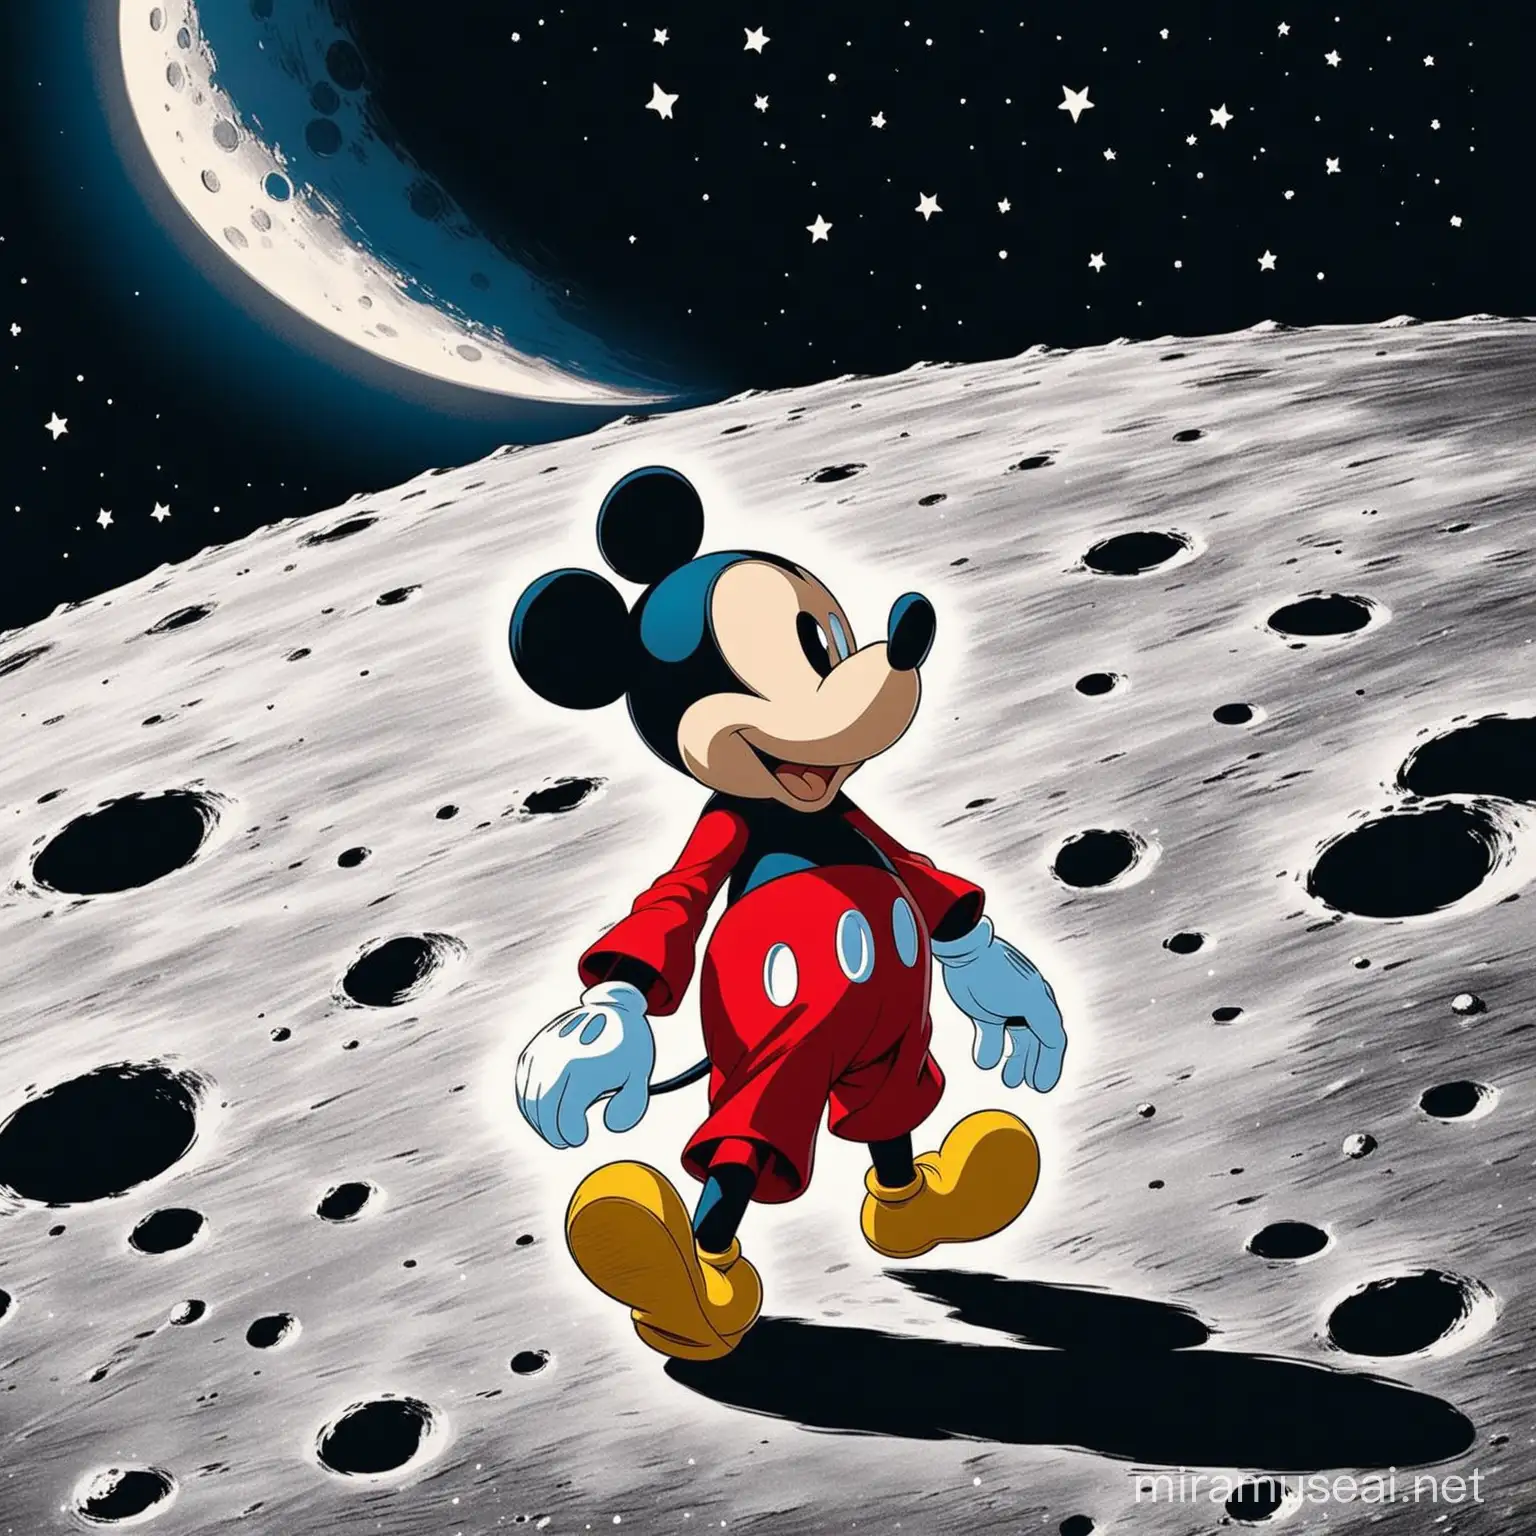 Moonlit Adventure Mickey Mouse Strolls the Lunar Surface